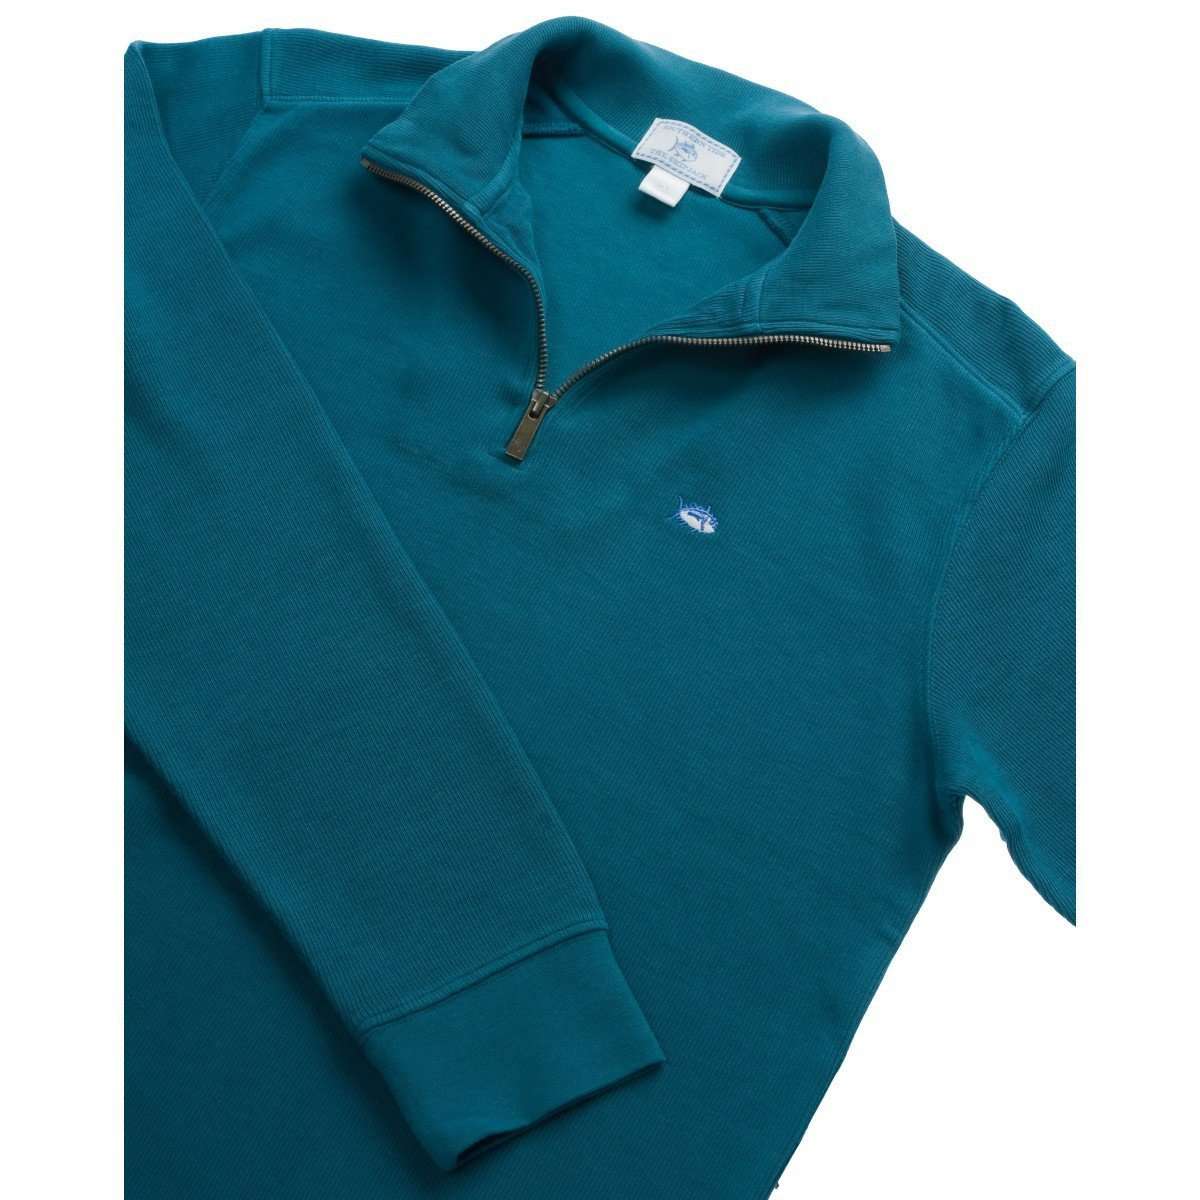 Solid Ribbed 1/4 Zip Pullover in Blue Coral by Southern Tide - Country Club Prep